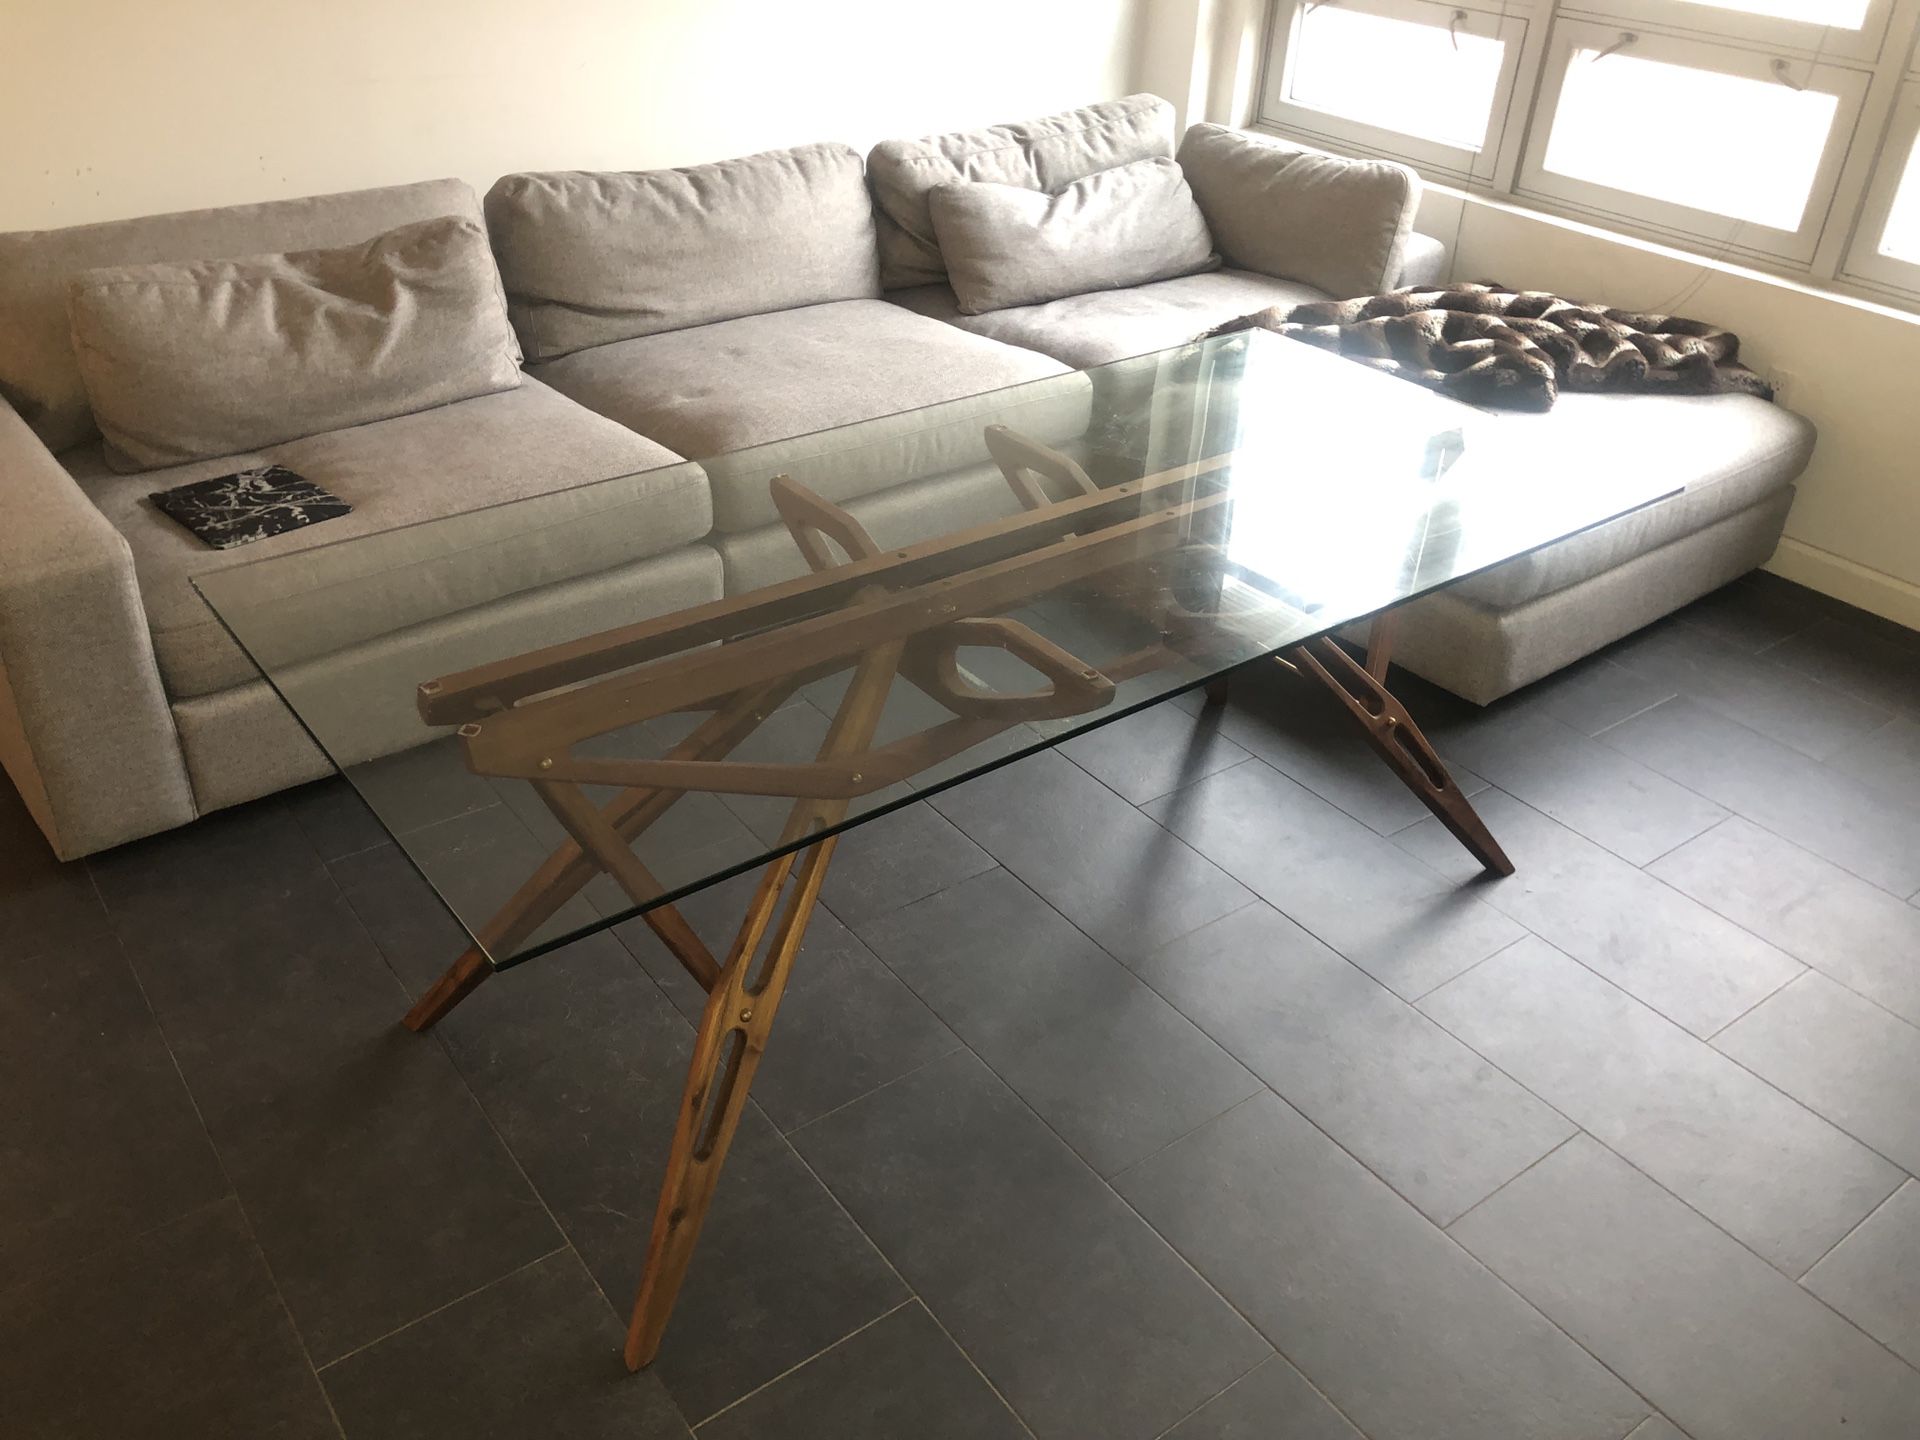 Handmade dining table from organic modernism